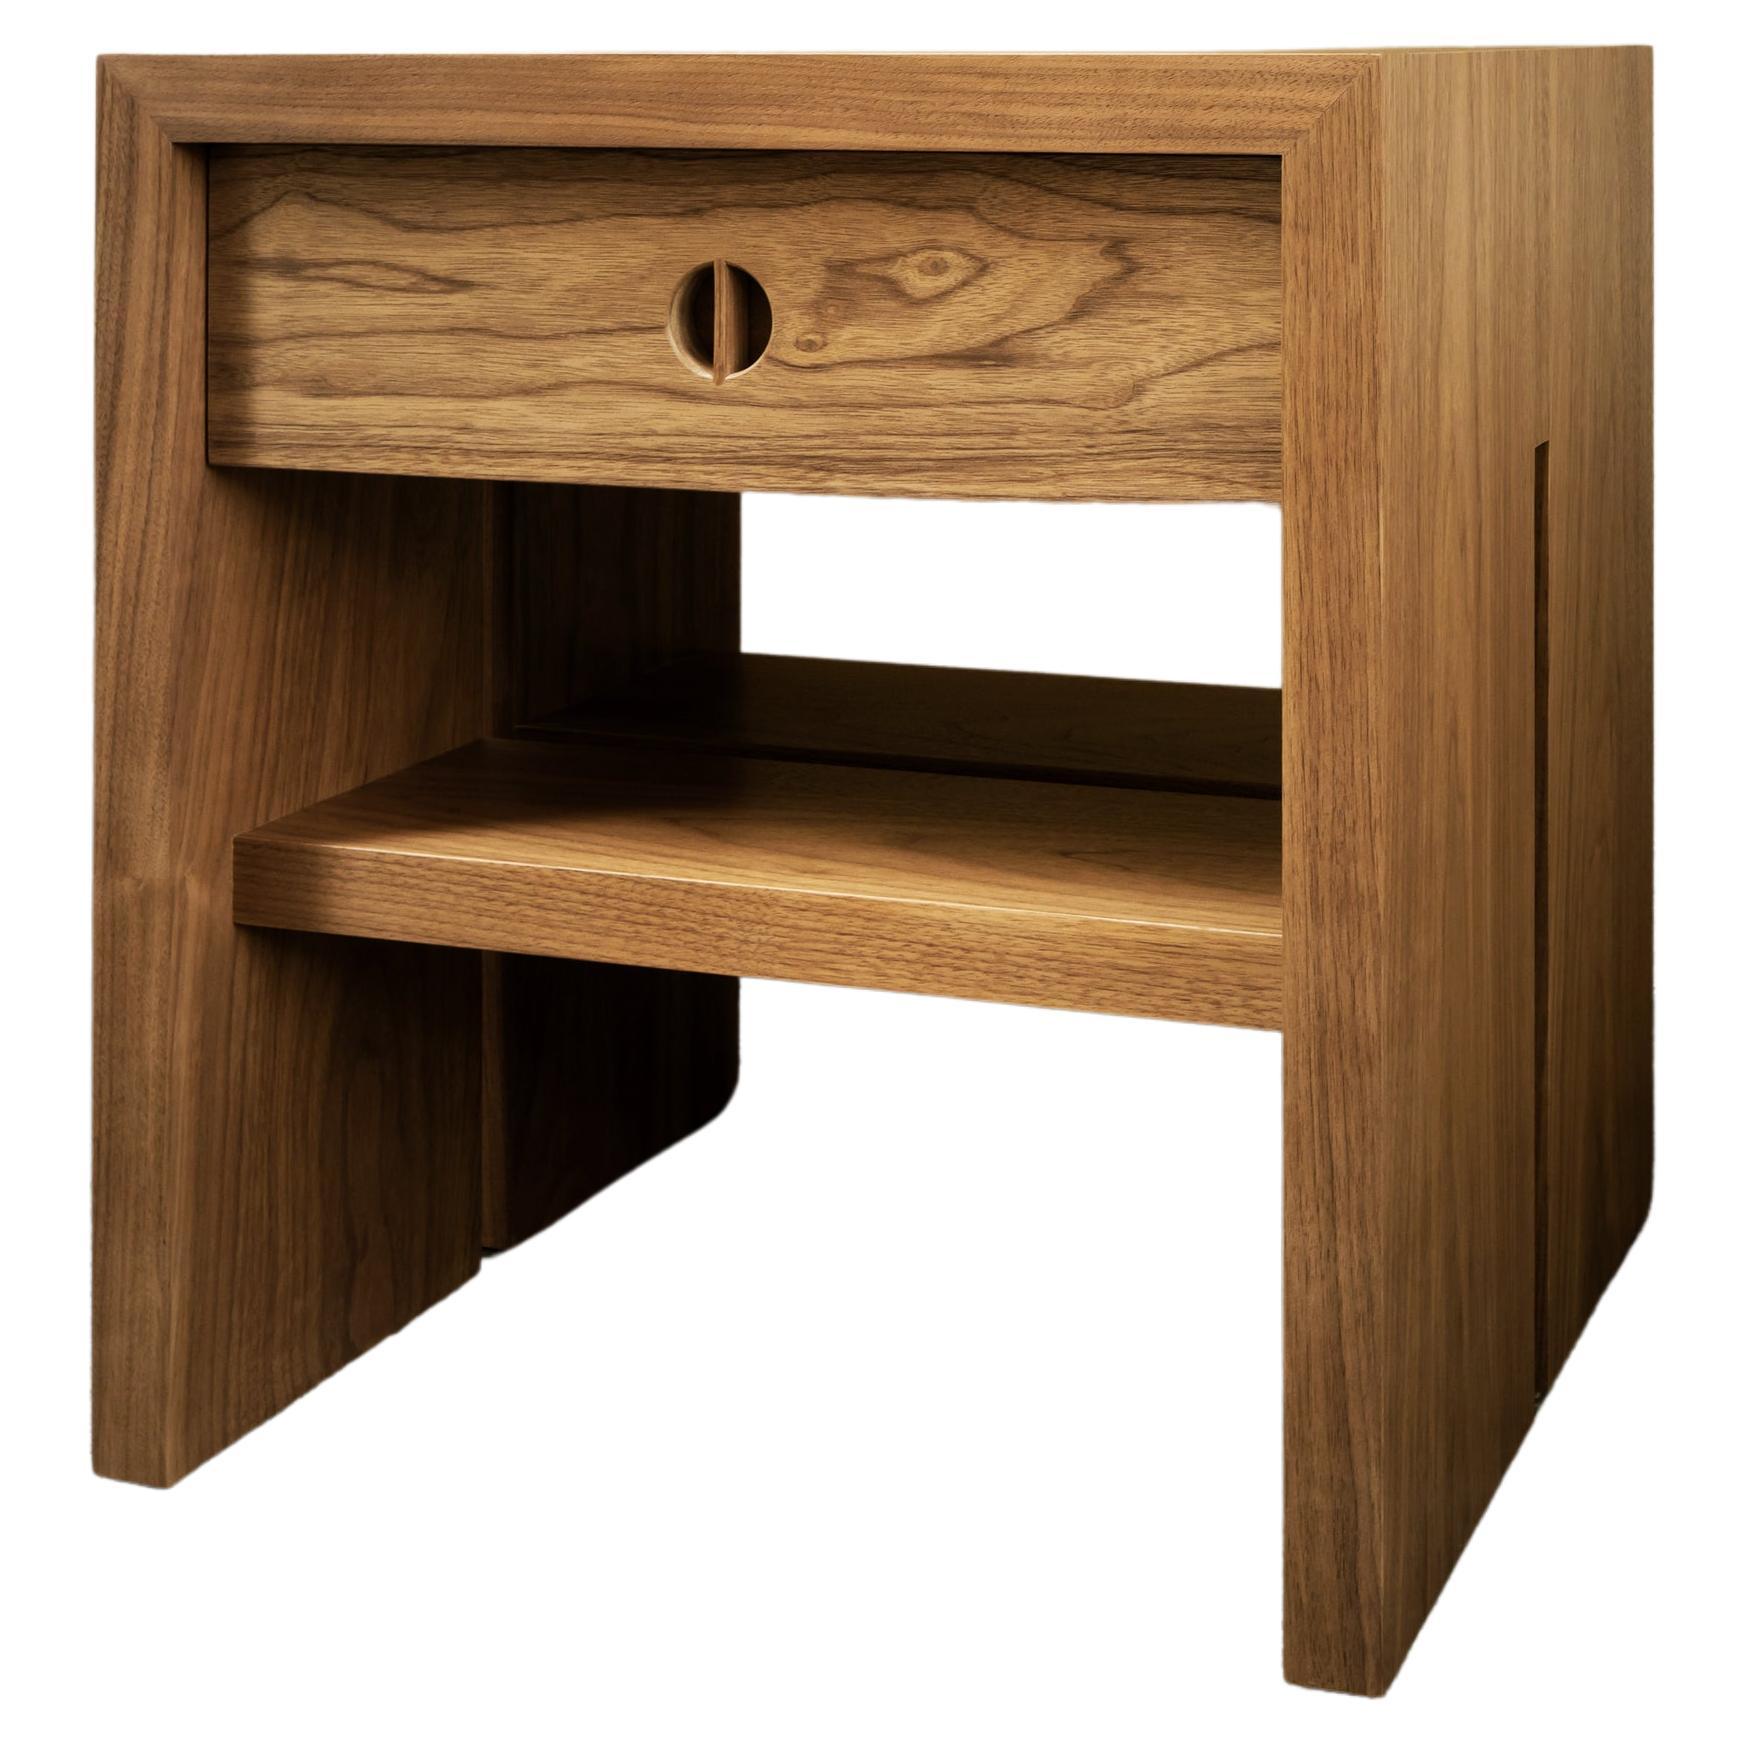 This custom nightstand with drawer is hand-made in the United States with all hardwood construction. Characterized by its striking waterfall design, unique split leg detail, and convenient and accessible storage drawer and shelf, the minimalist